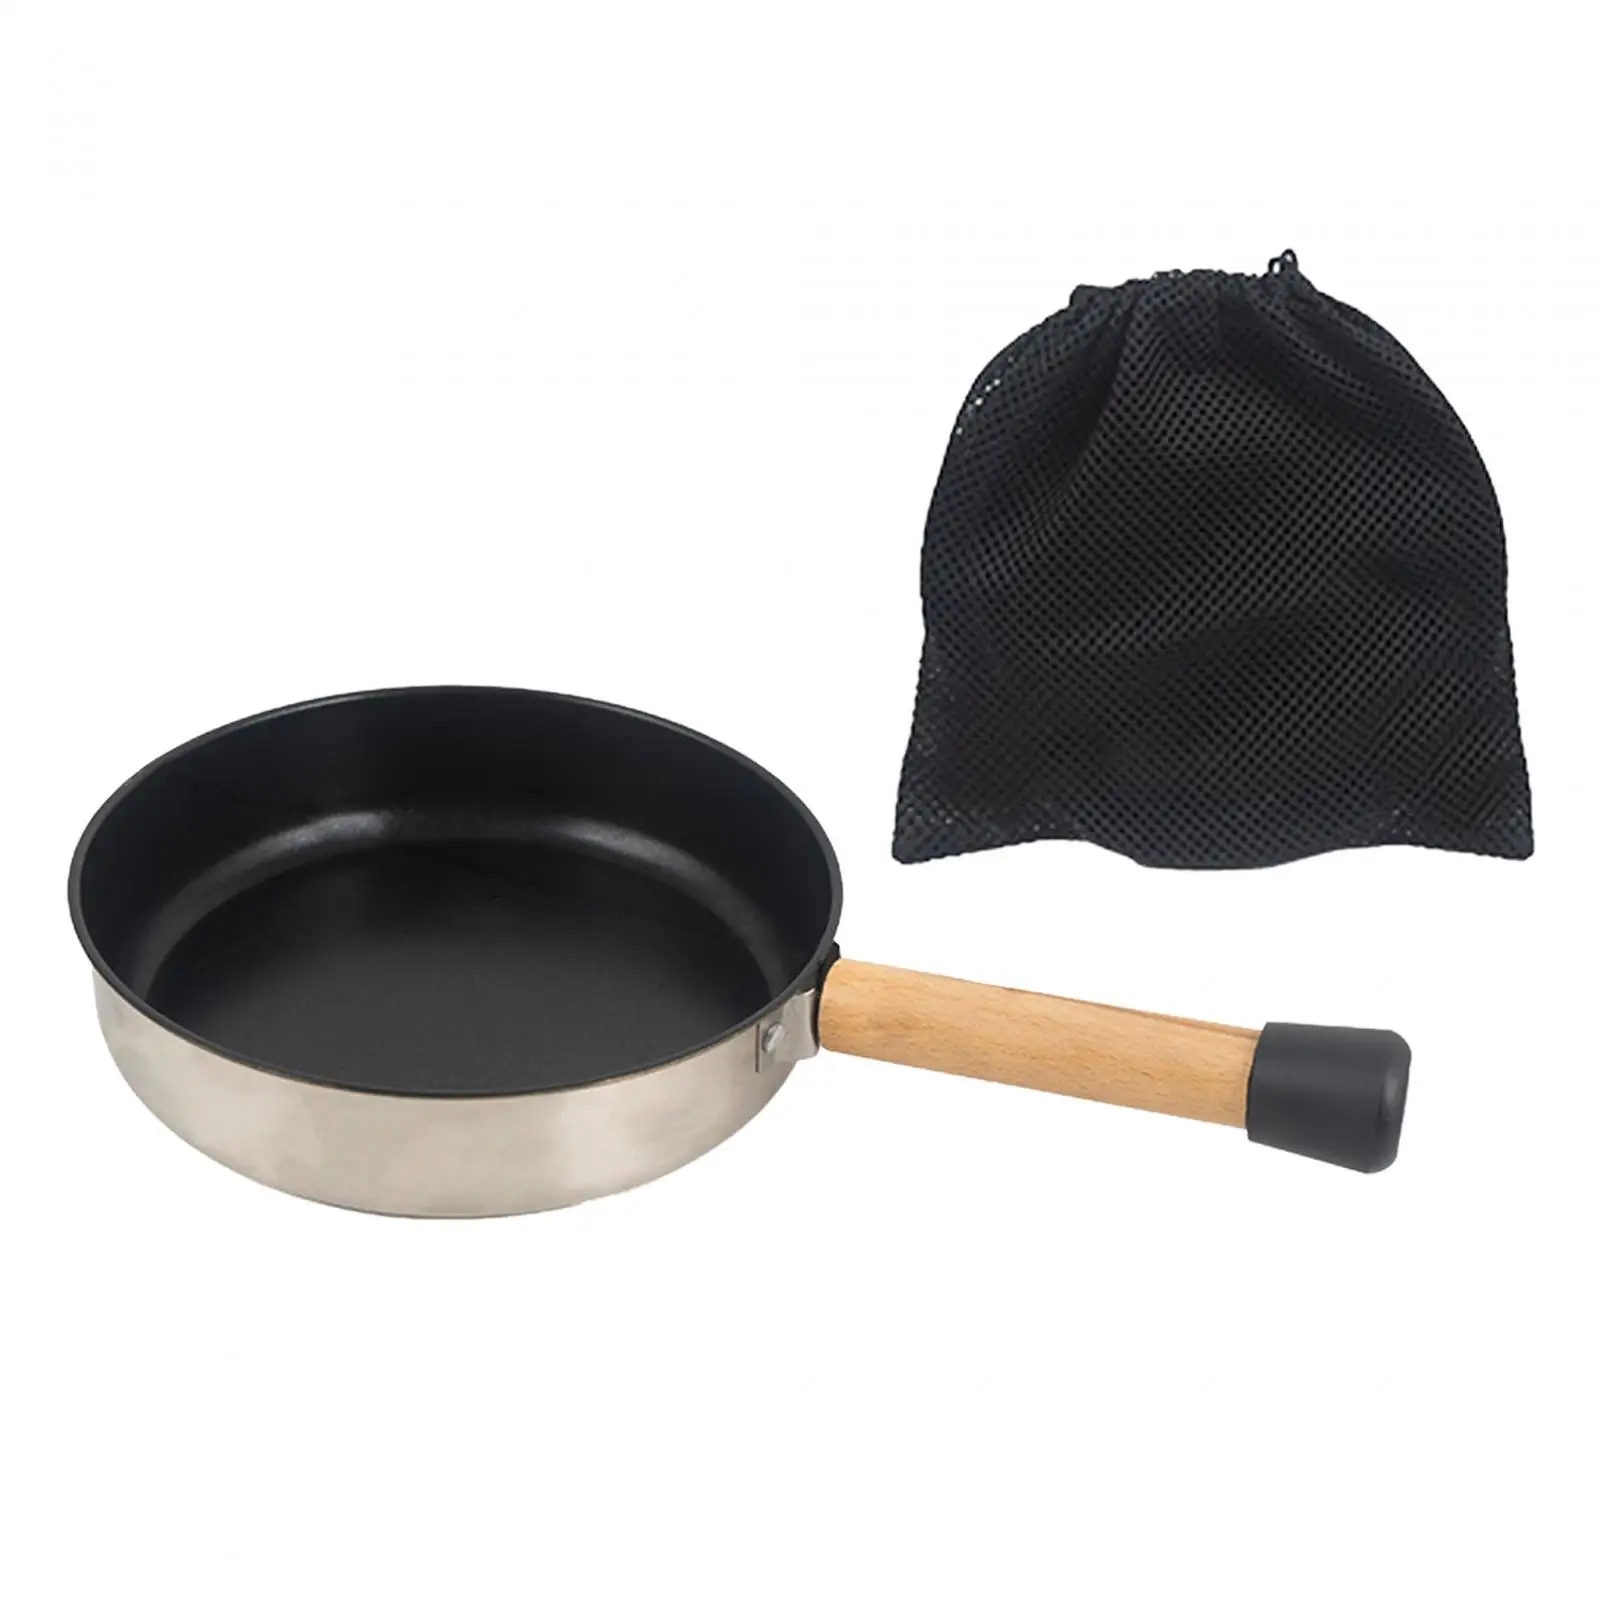 Non Stick Frying Pan Kitchen Cookware Tableware Equipment with Wooden Handle for Indoor Camping Outdoor Activities Picnic Hiking